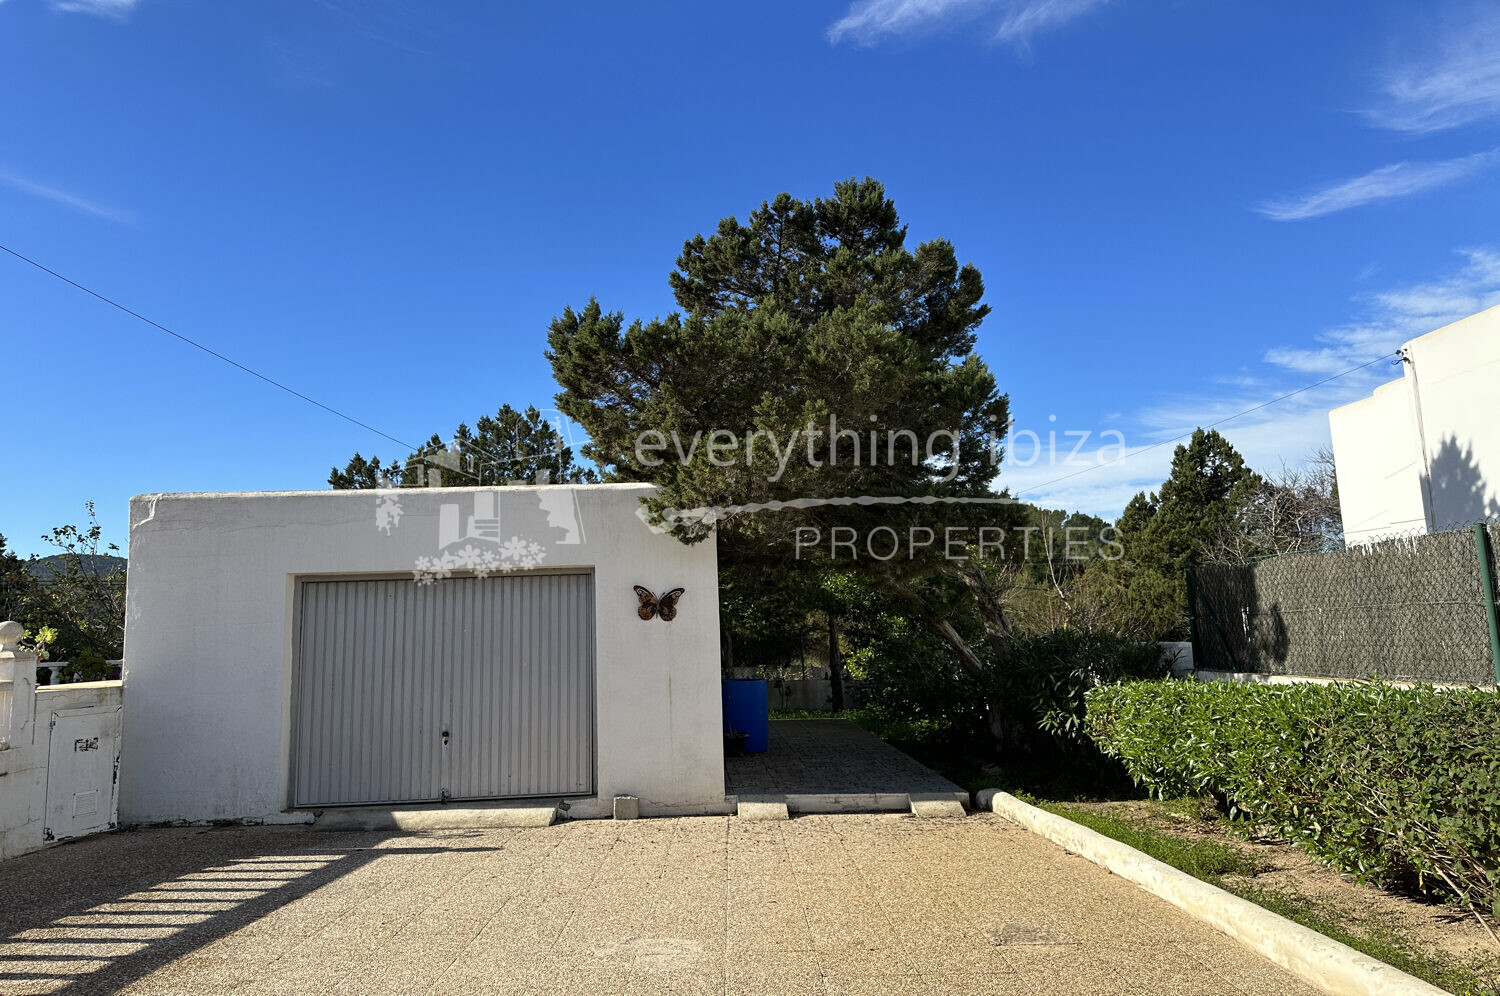 Elegant Detached Villa with Pool in Sought After San Agustin, ref. 1524, for sale in Ibiza by everything ibiza Properties